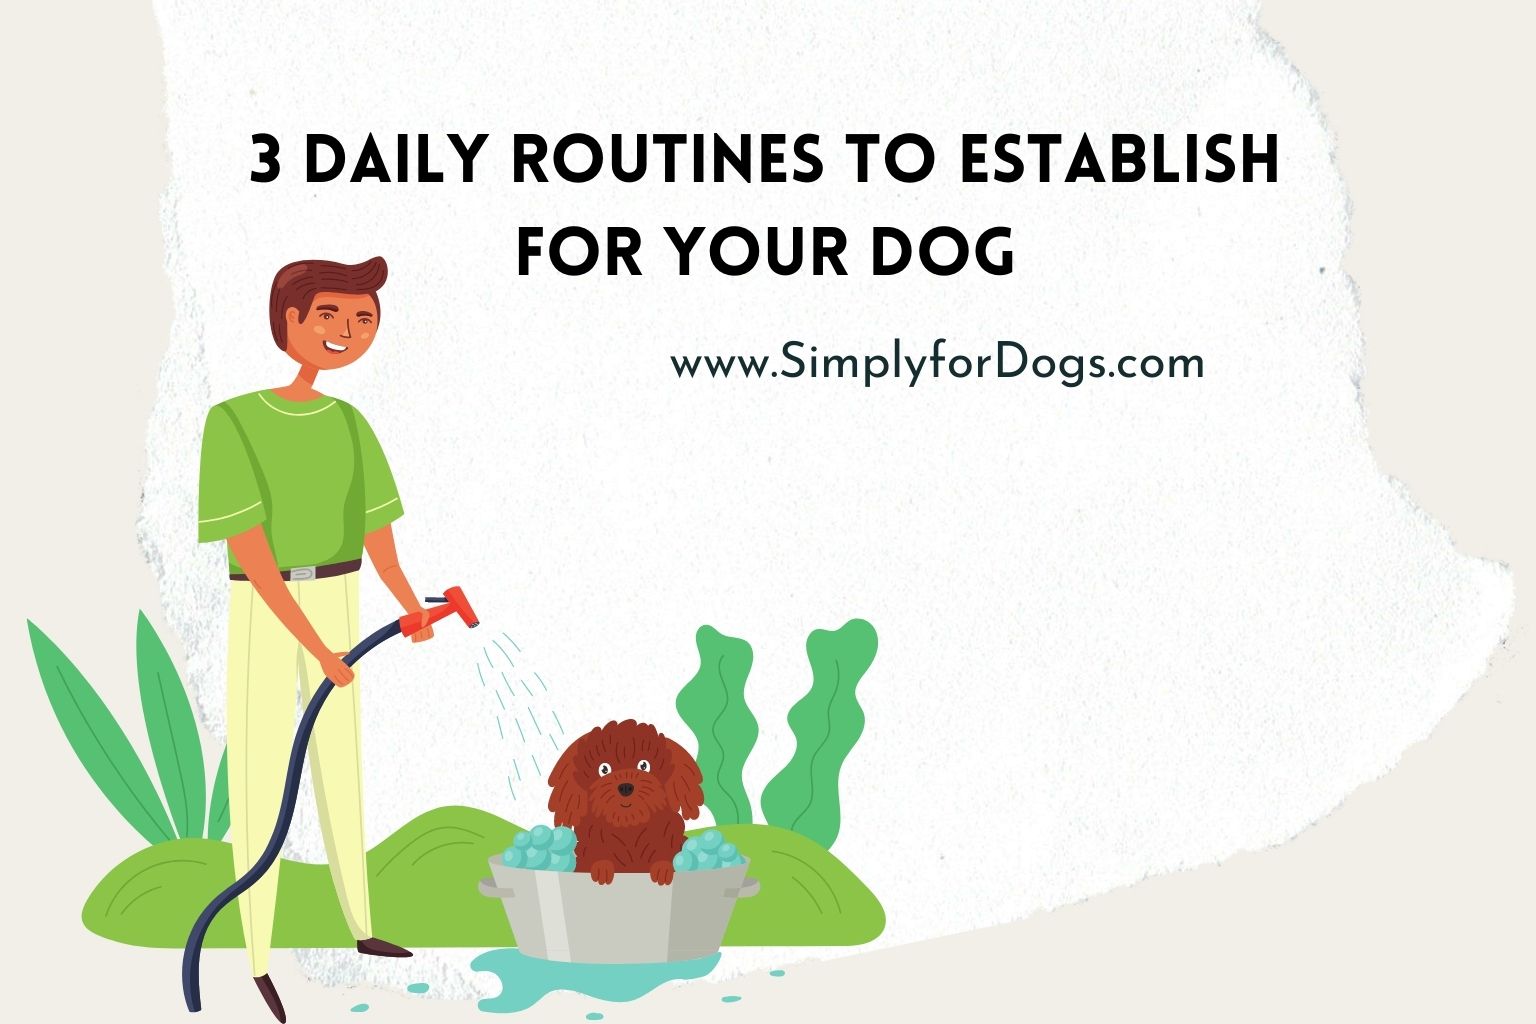 3 Daily Routines to Establish for Your Dog